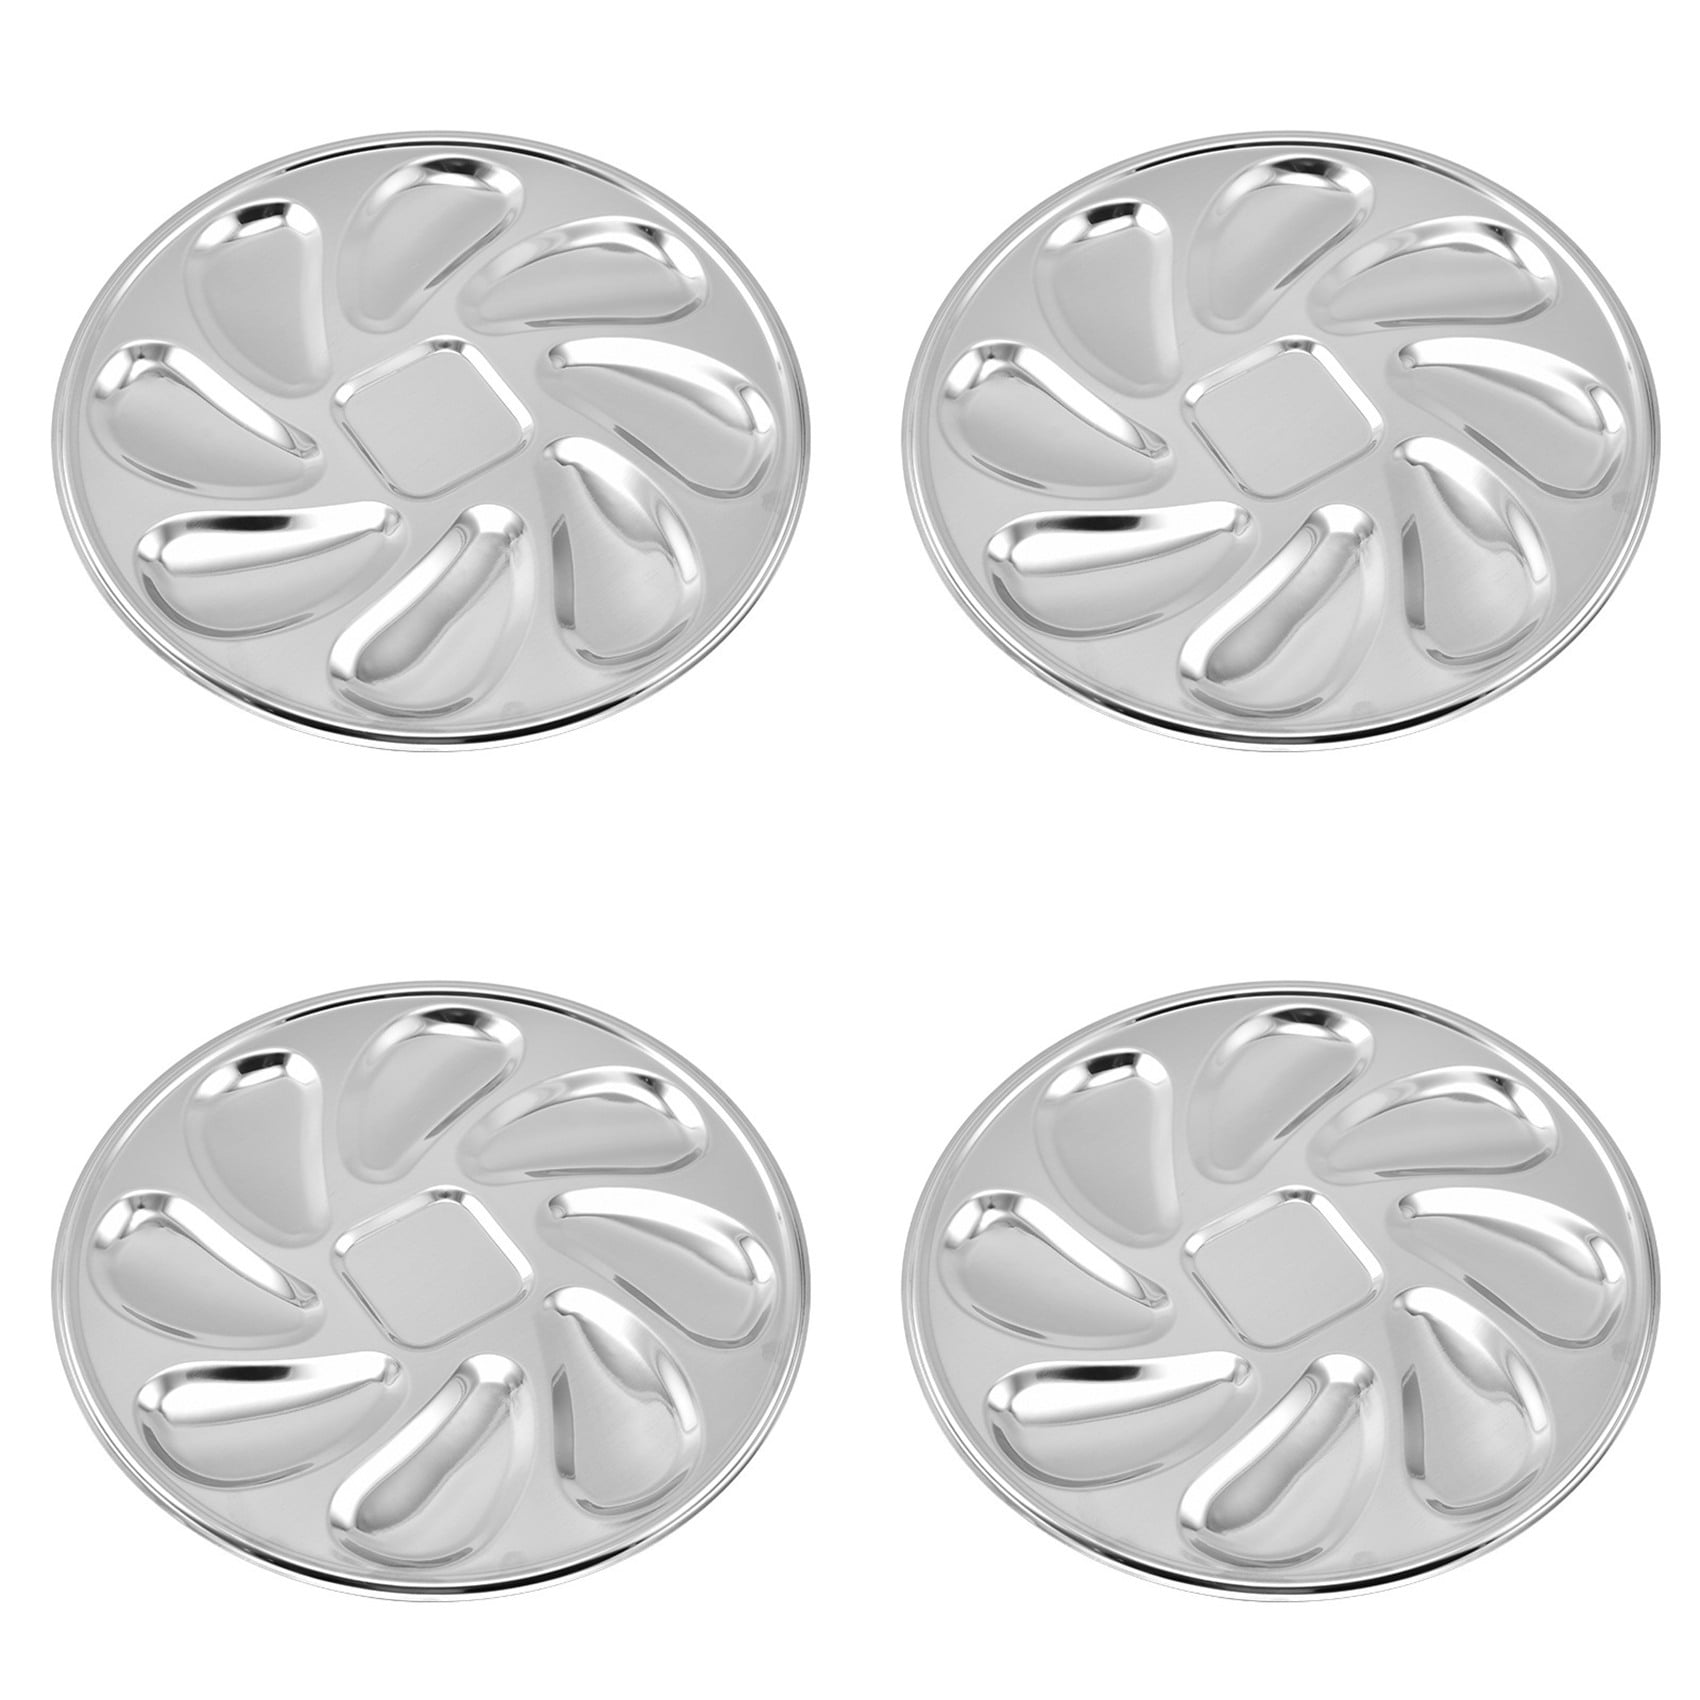 4PCS Oyster Plate Stainless Steel Oyster Plates Shell Shaped Durable Oyster  Container with 8 Slots for Oyster Sauce - Walmart.com